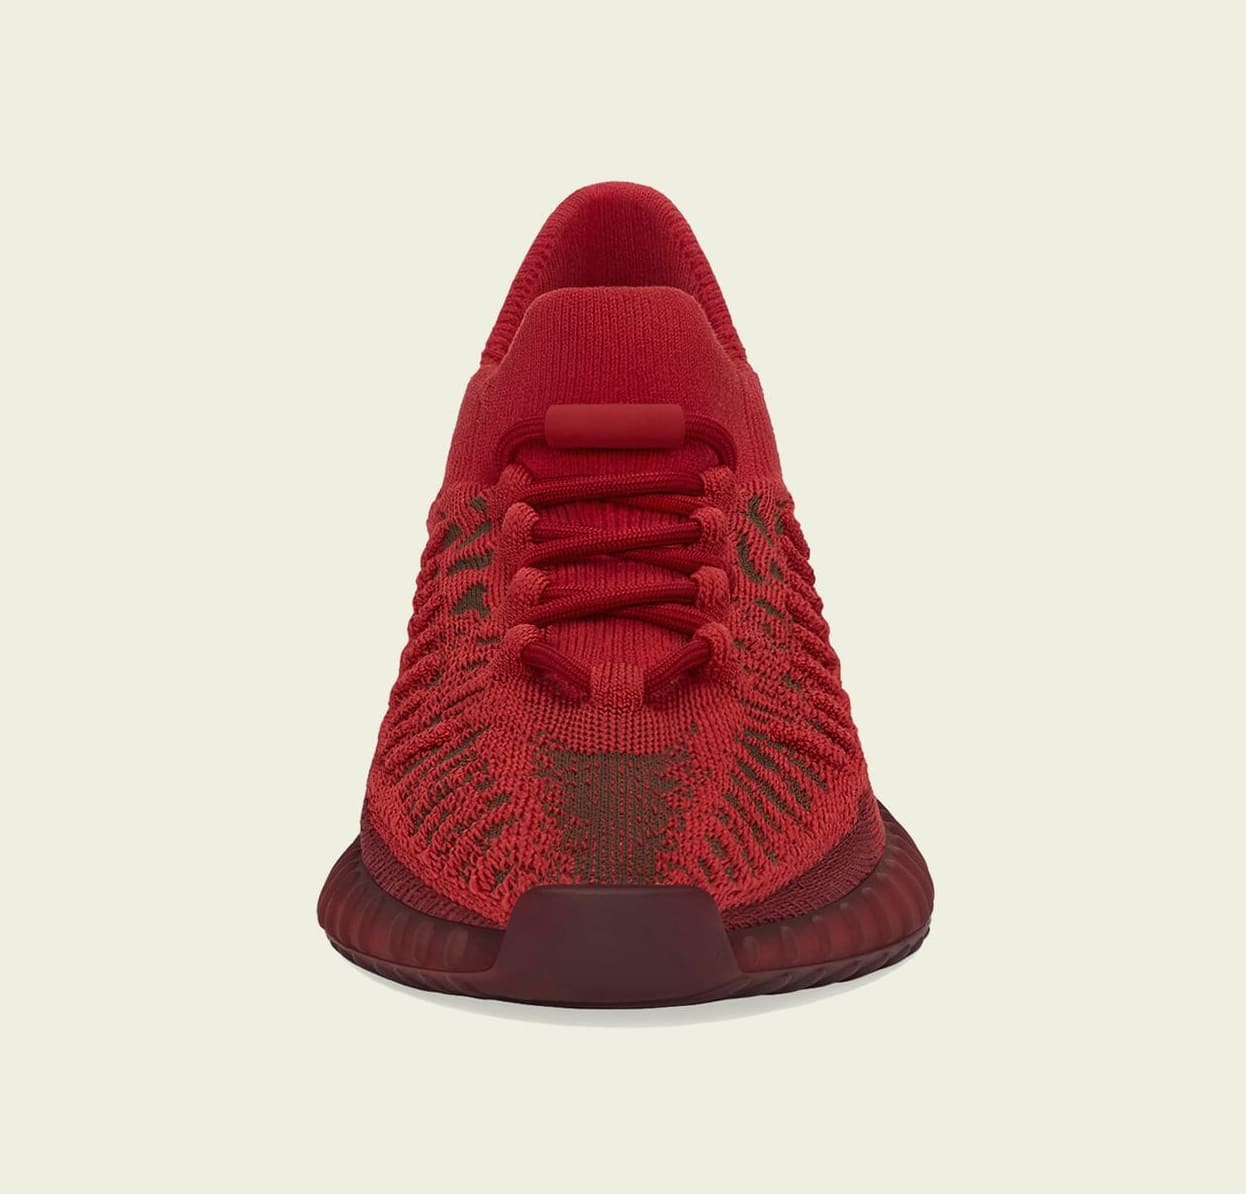 Yeezy Boost 350 V2 CMPCT 'Slate Red' Is Coming Soon!